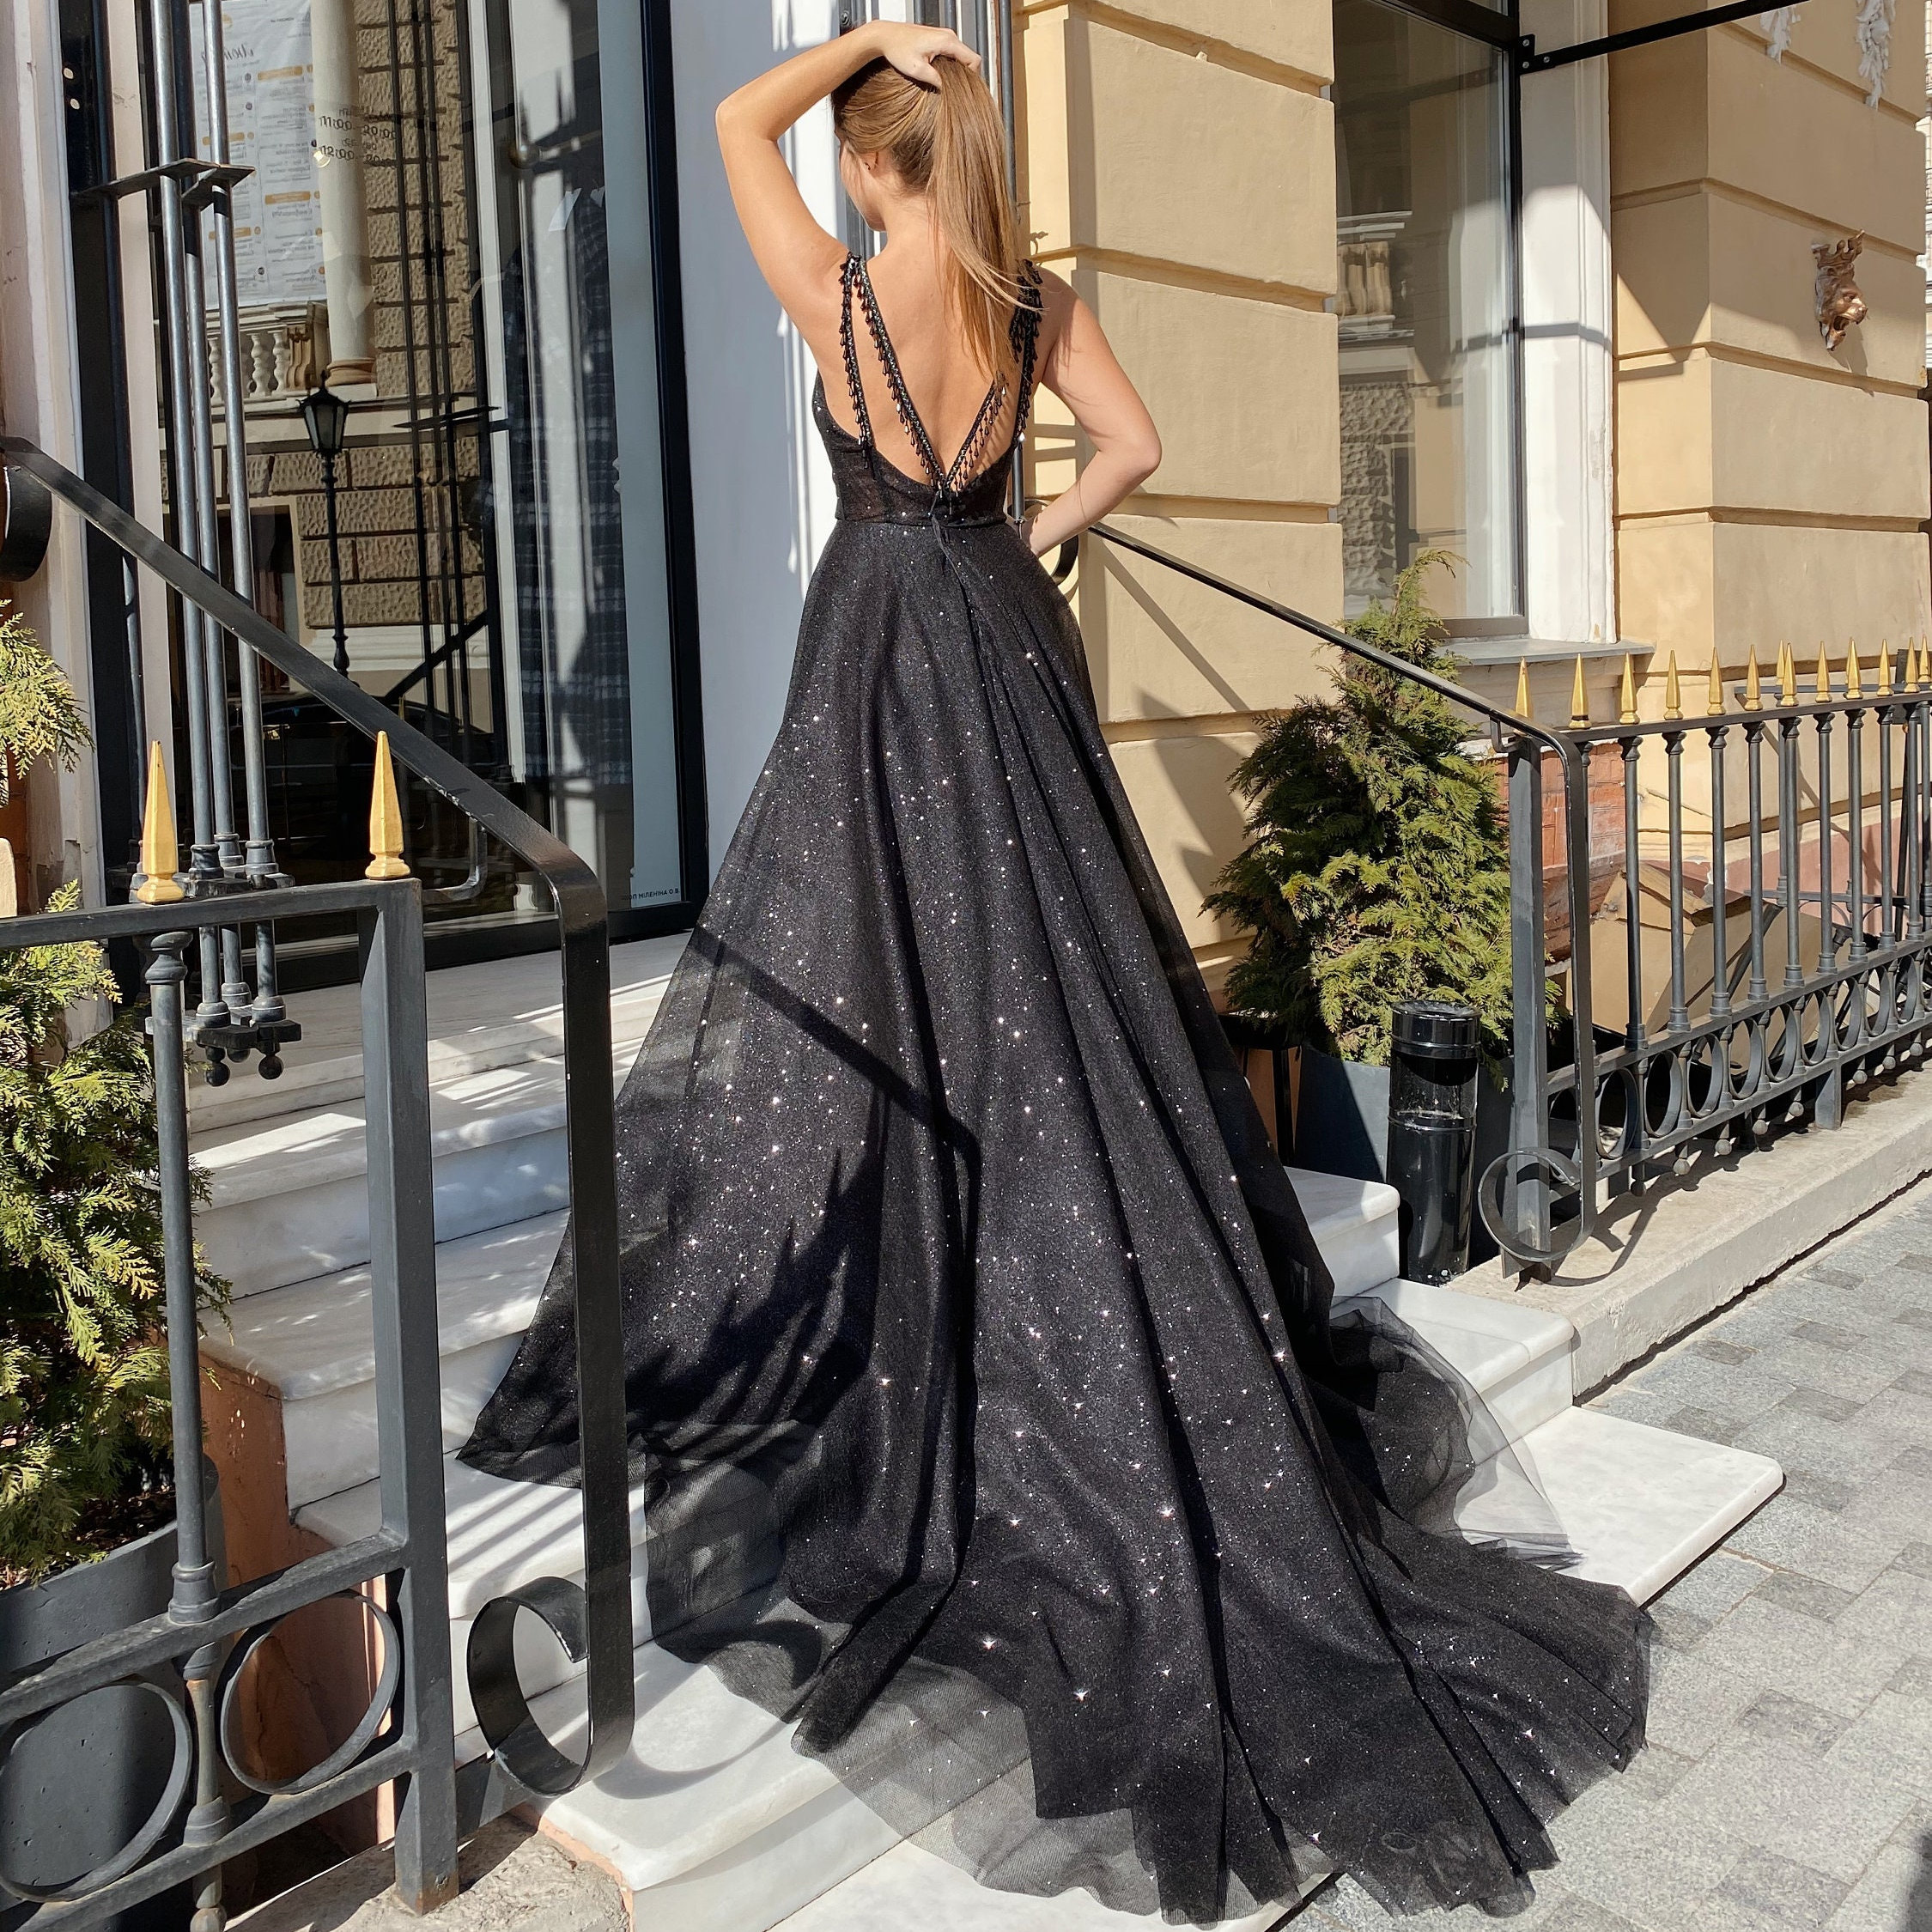 Buy Sparkly Black Prom Dress, A-line Prom Dress With Detailed Back